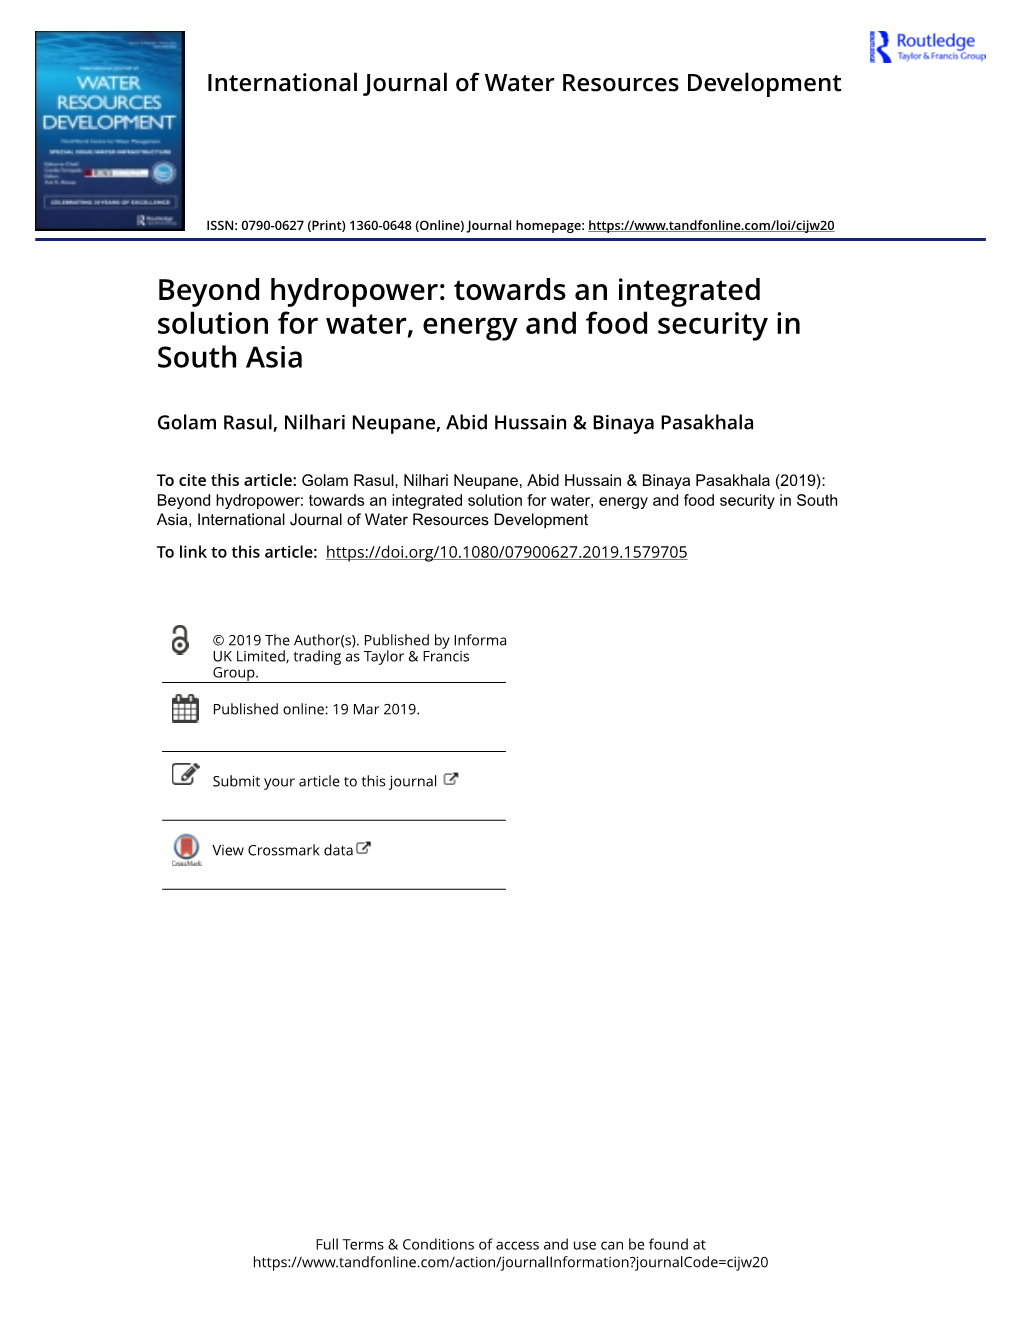 Beyond Hydropower: Towards an Integrated Solution for Water, Energy and Food Security in South Asia